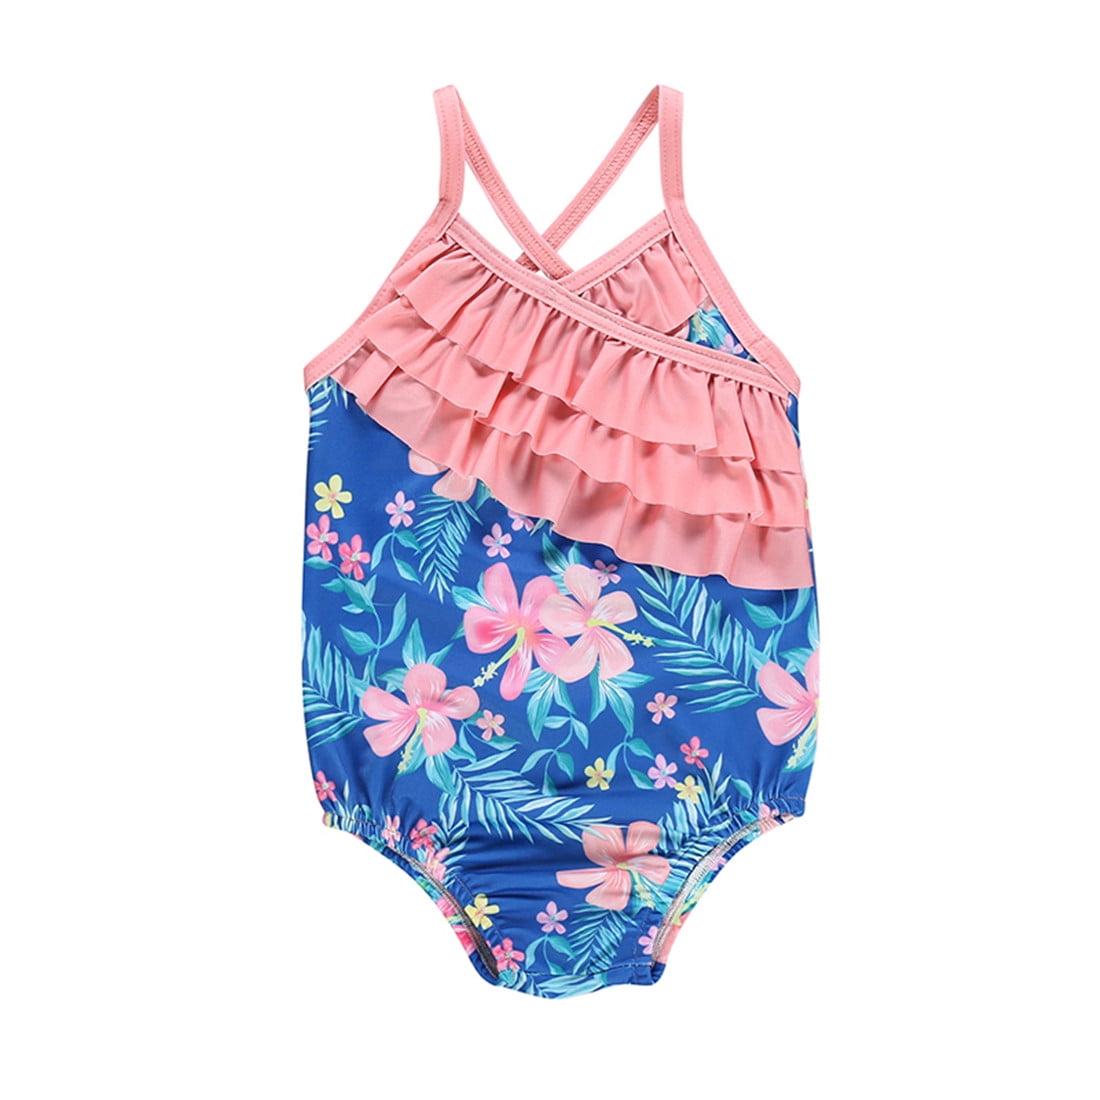 Details about   New Infant Girls Old Navy Floral Halter 1 Pc Swimsuit 12-18 18-24 Months